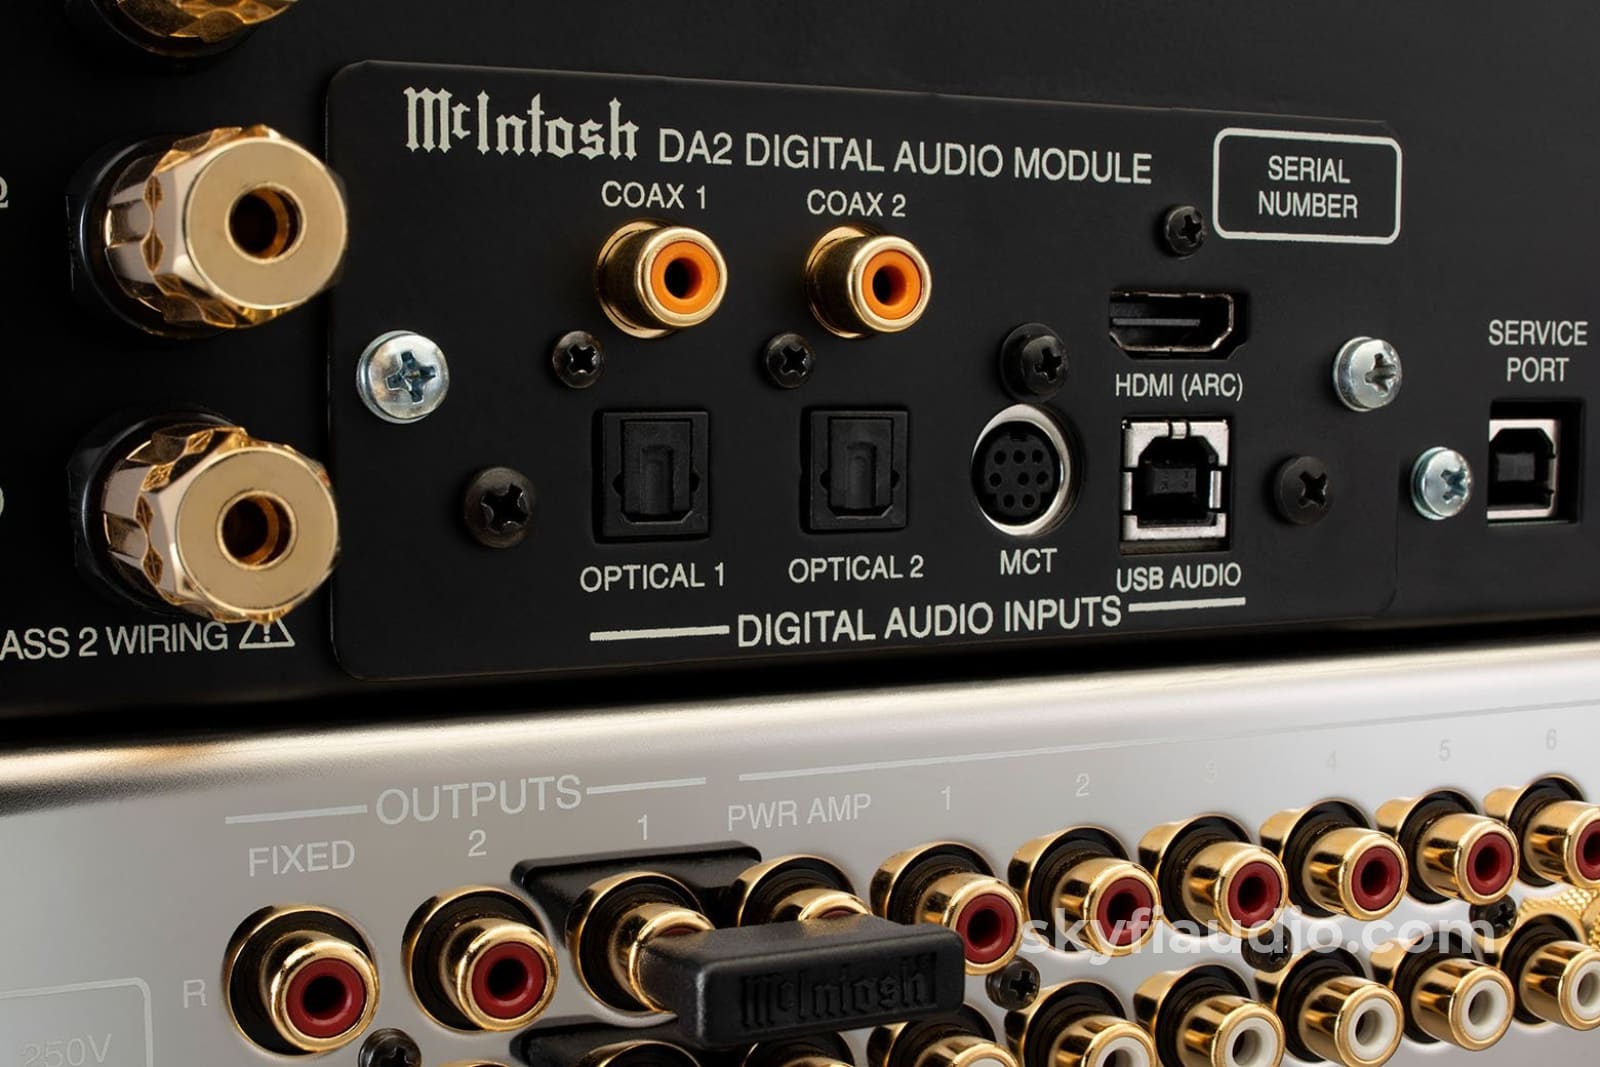 Mcintosh Ma8950 Integrated Amplifier And Dac